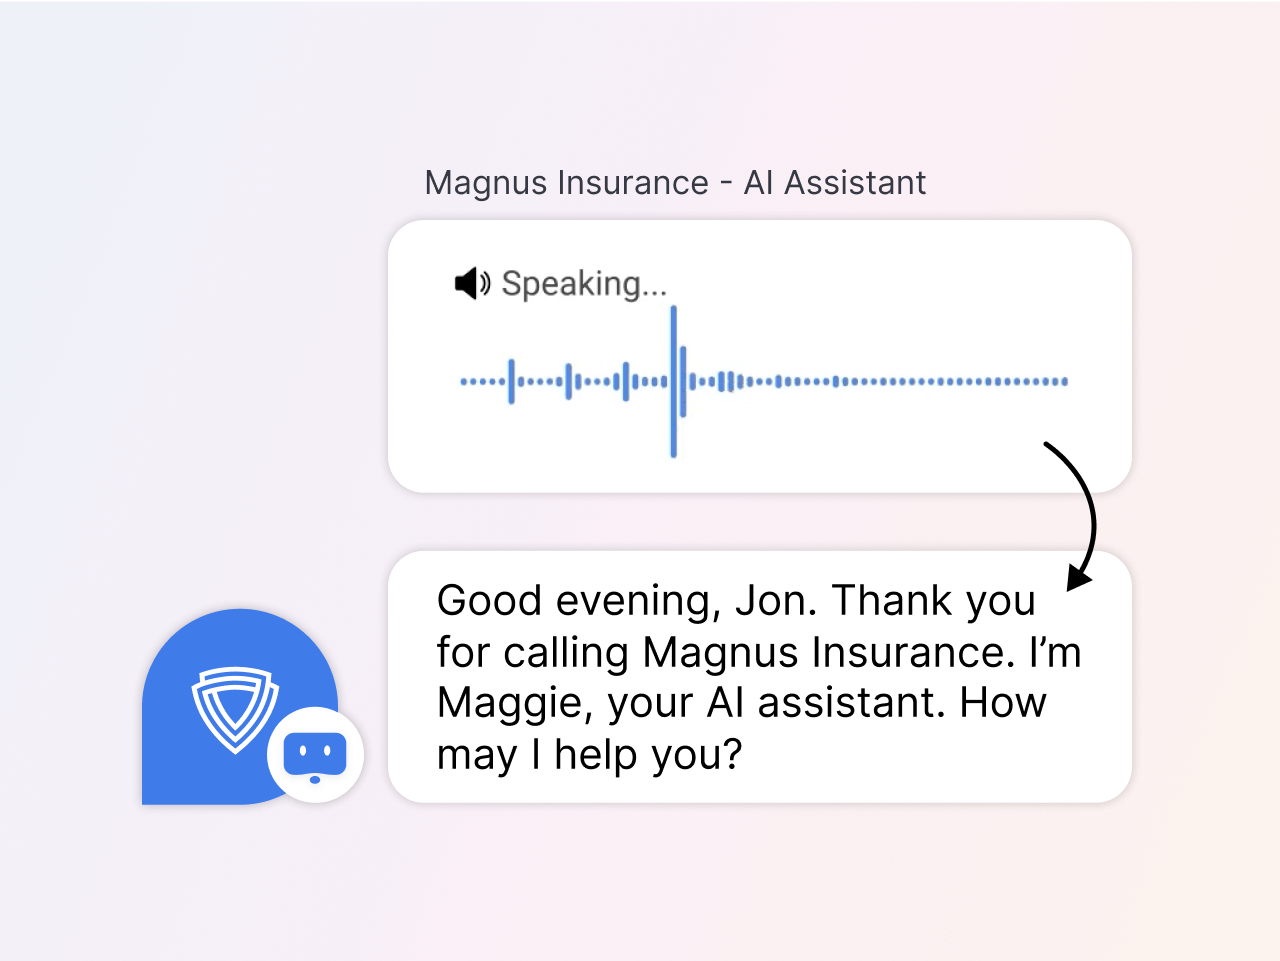 Voice bot listening to phone call and transcribing it to text with AI technology